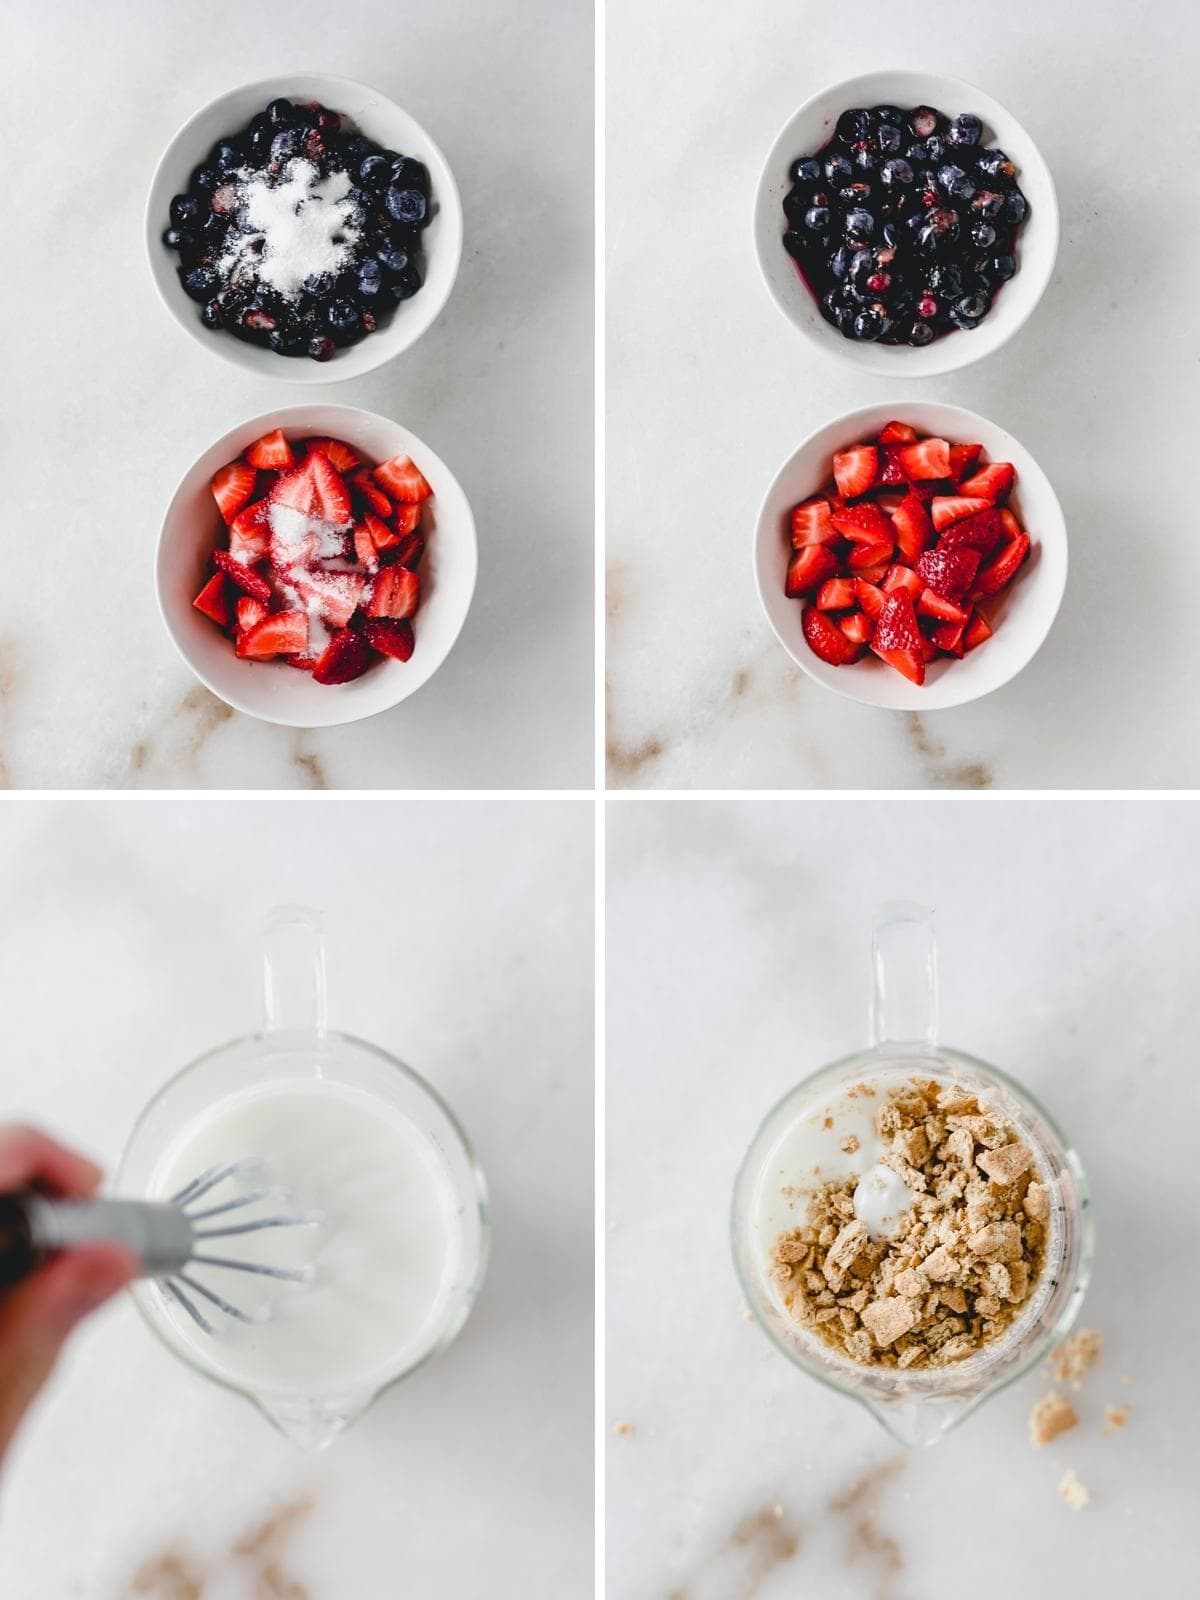 four image collage showing steps for mixing the berries and greek yogurt mixture for popsicles.